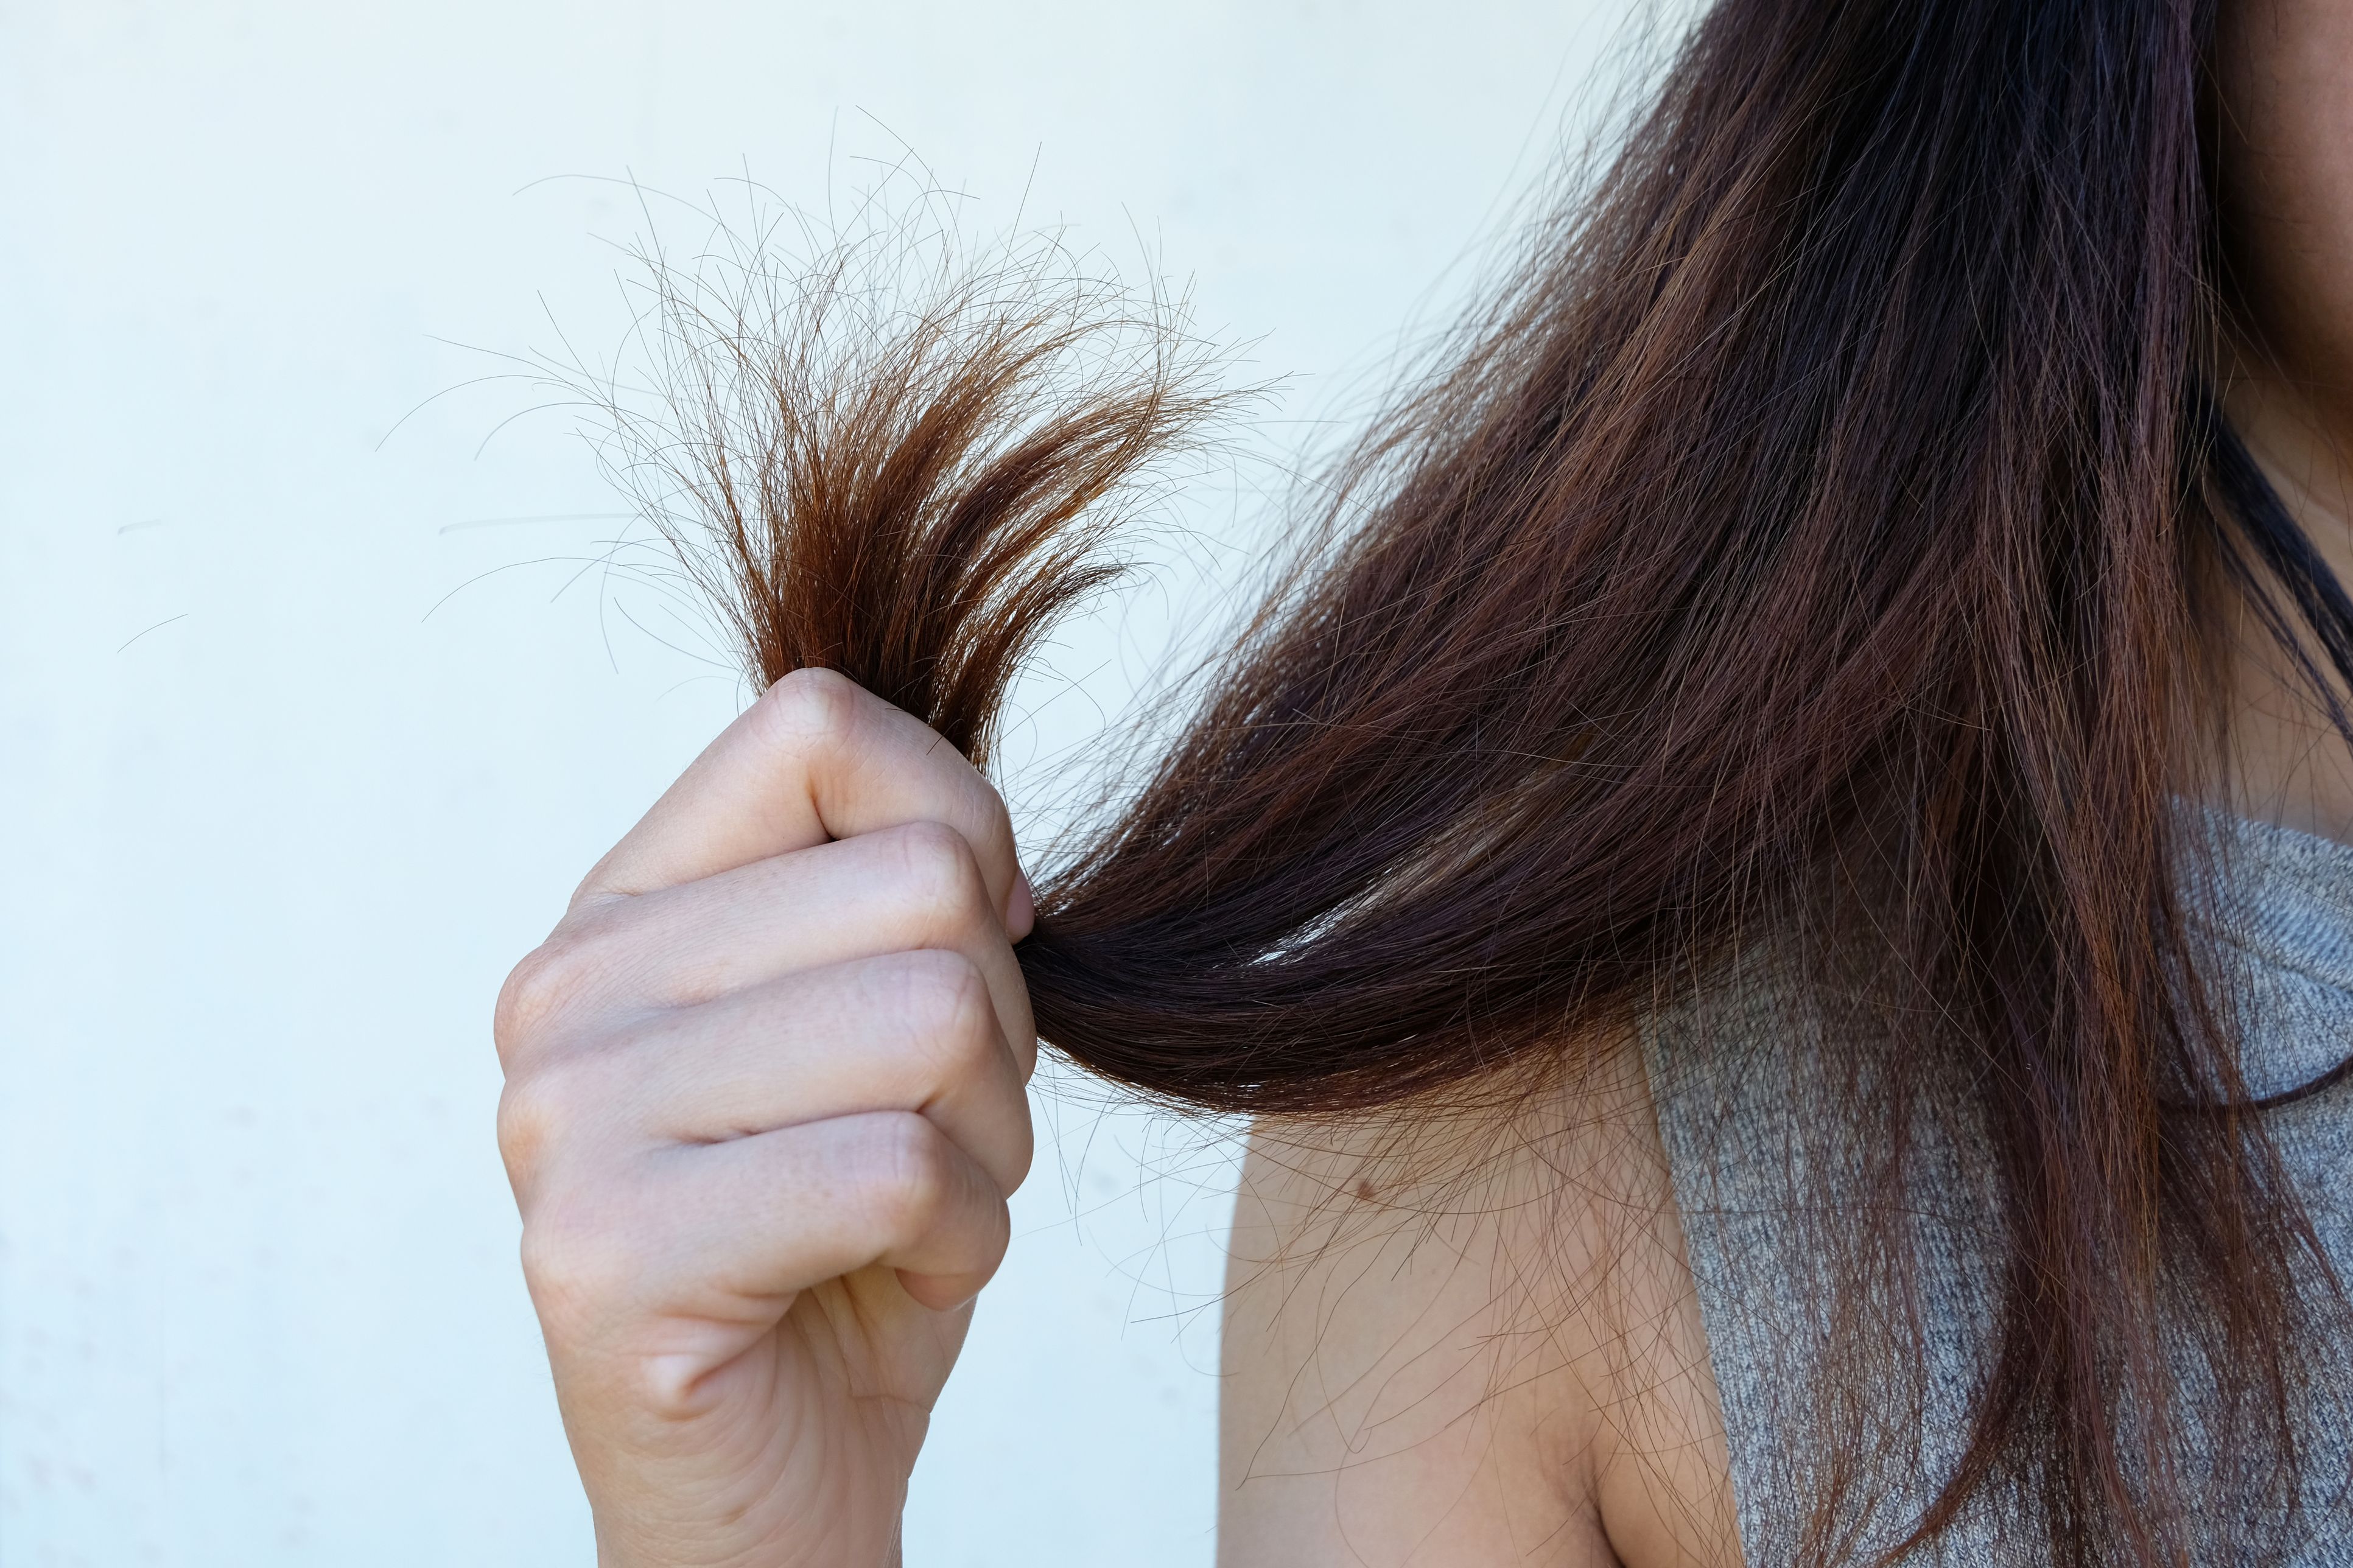 Itchy Pubic Hair: Causes and Treatment